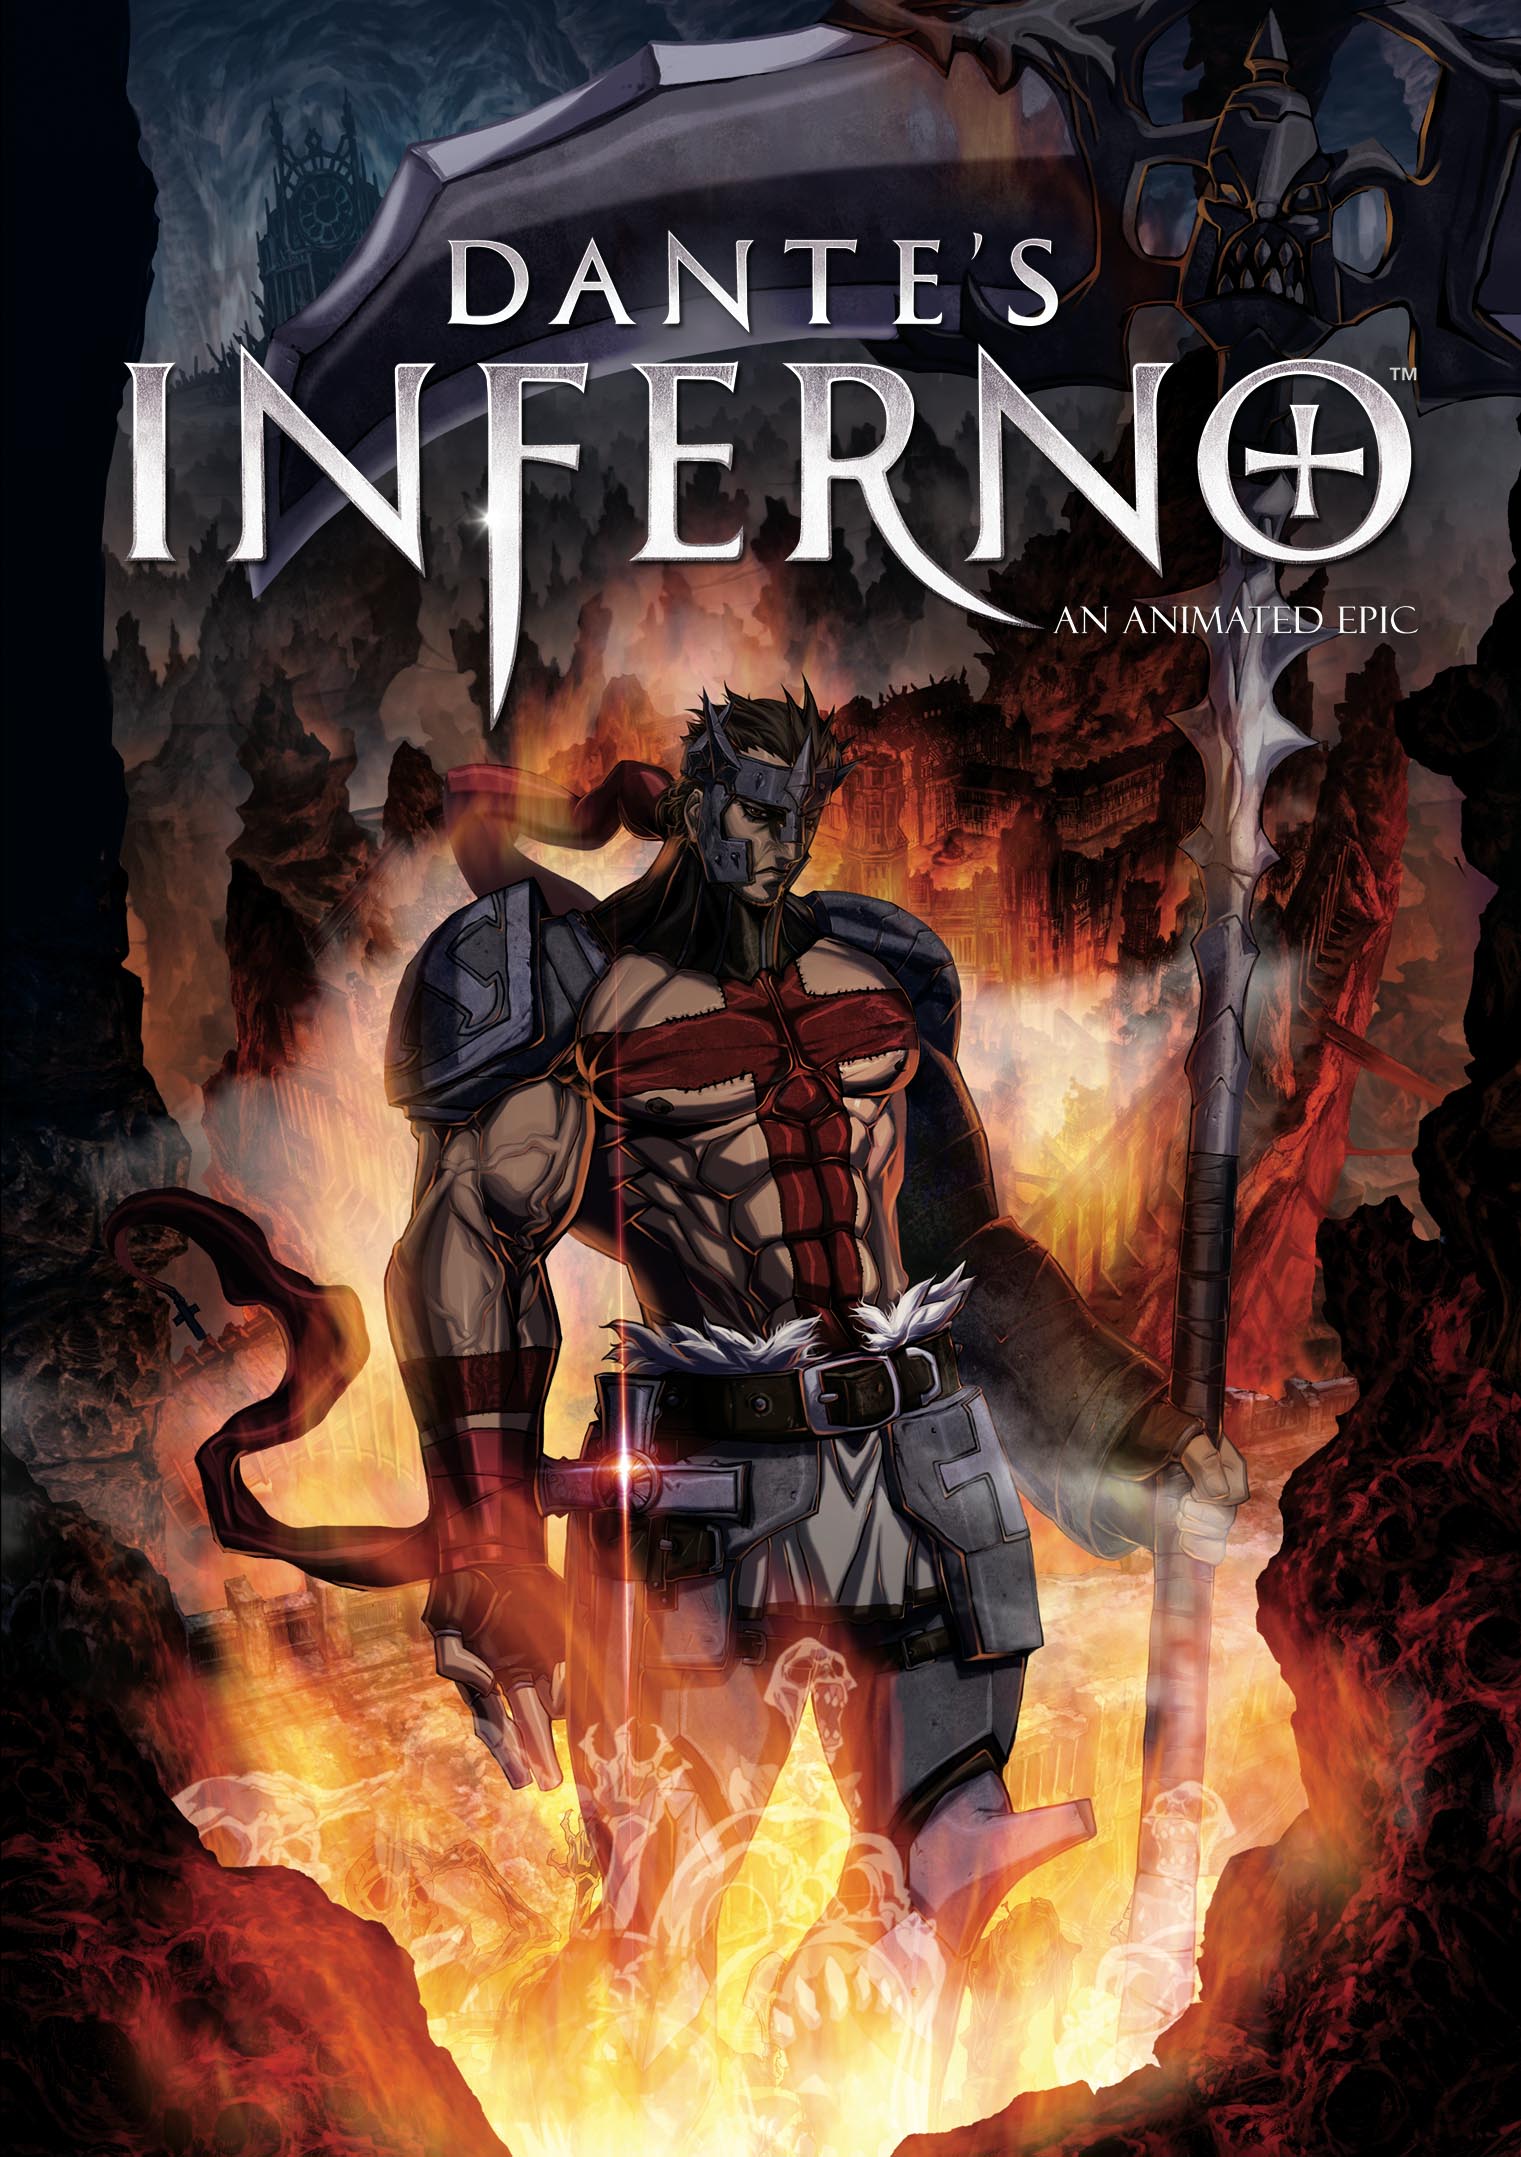 Dante's Inferno An Animated Epic (2010)